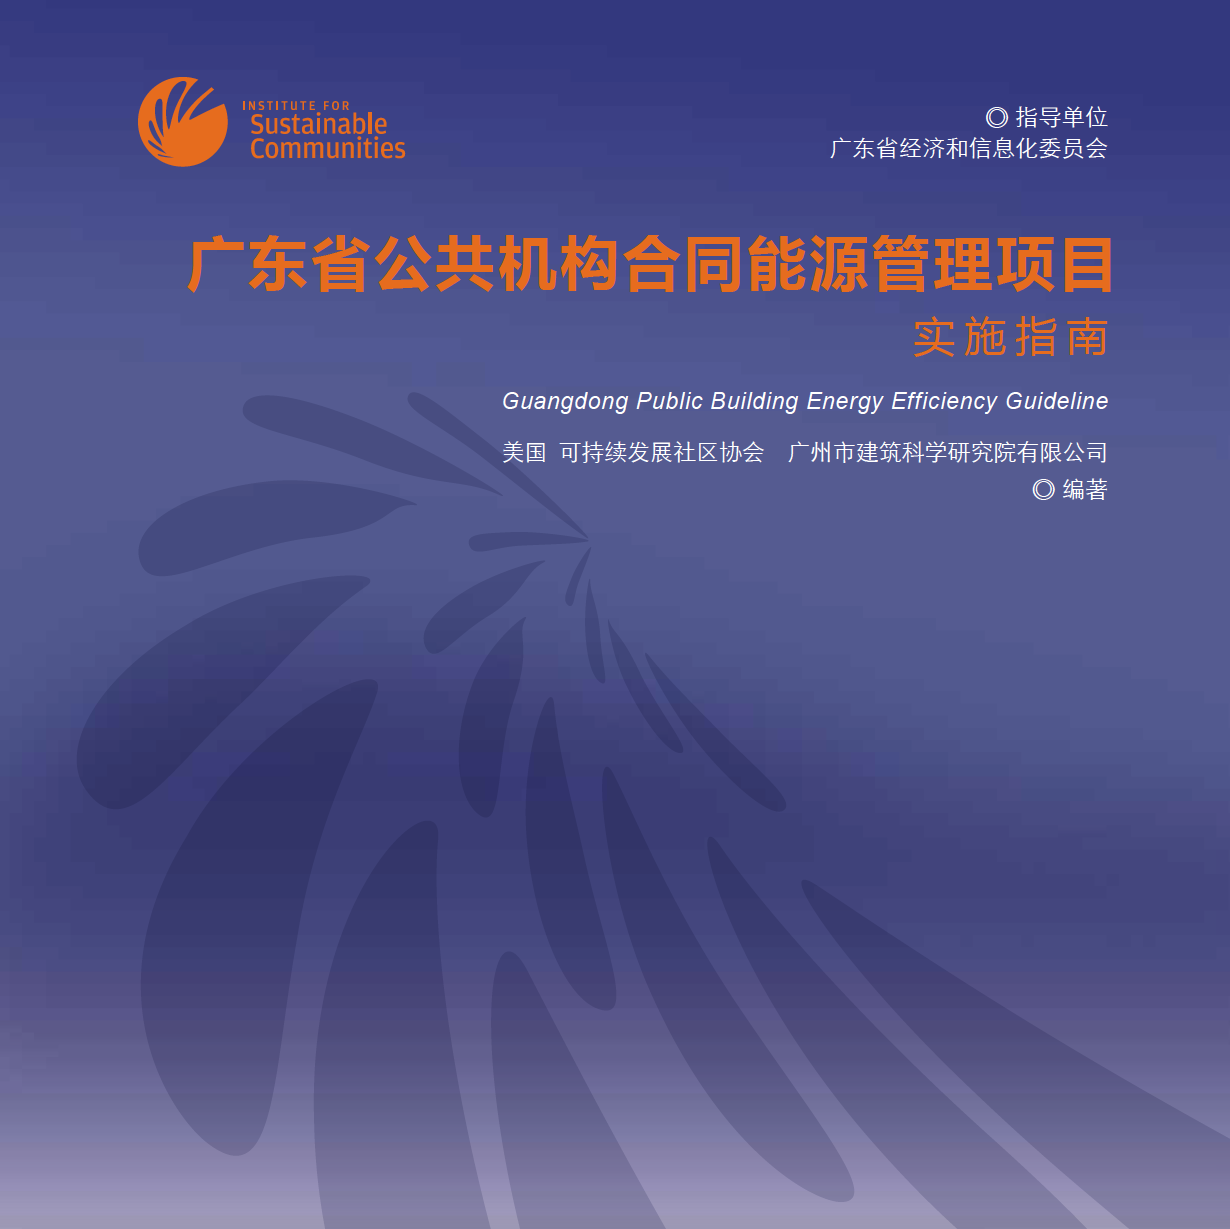 Guangdong public building energy efficiency guideline